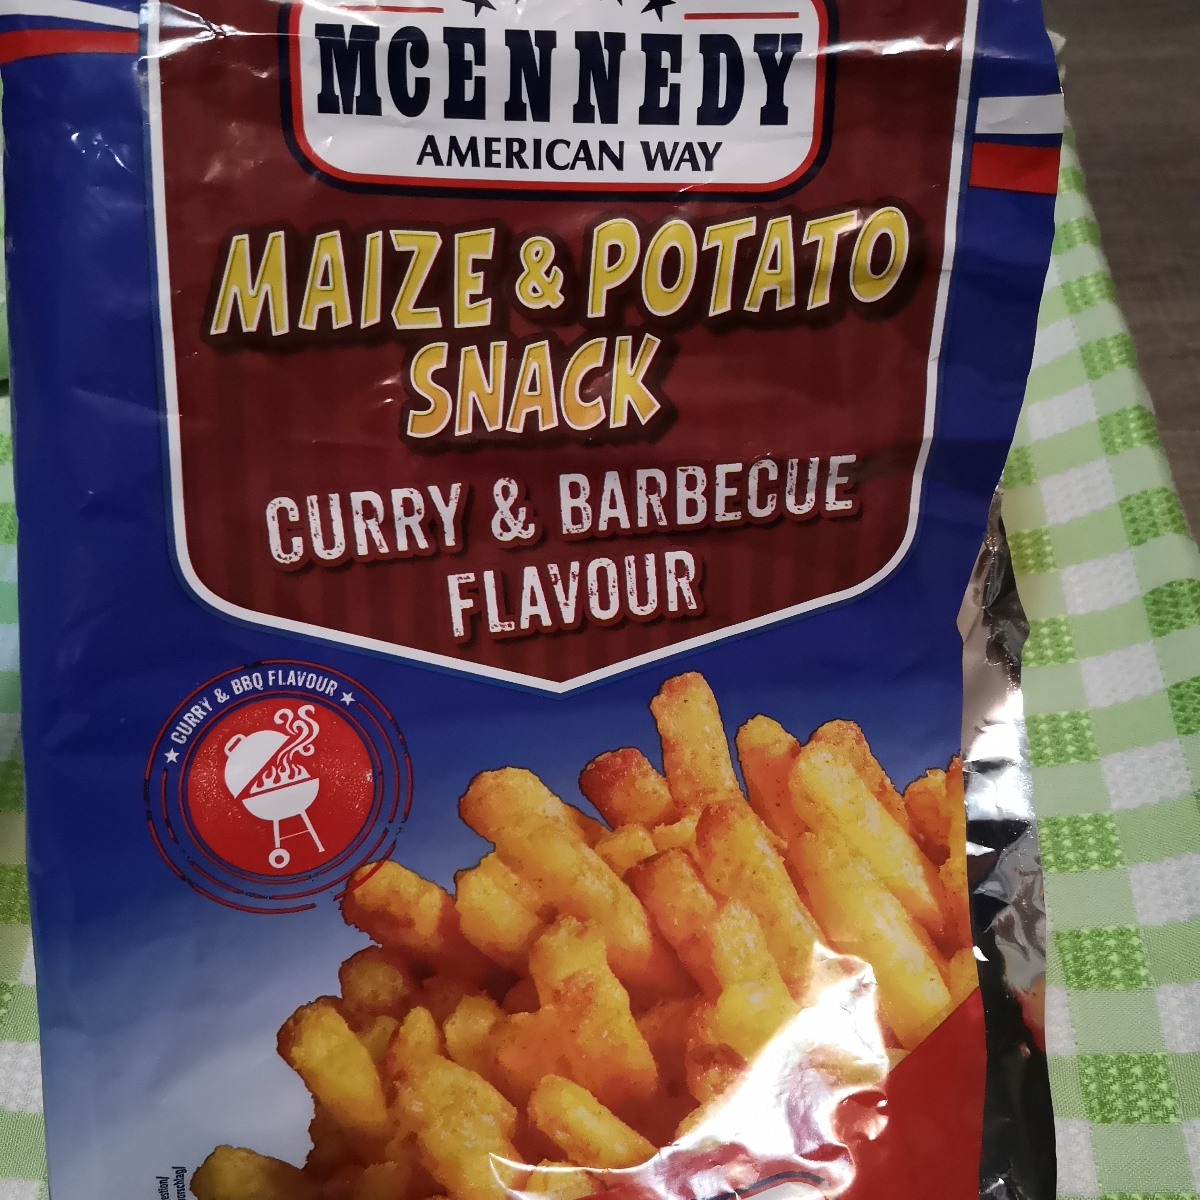 Mcennedy Reviews potato and and Curry | snack flavor Barbecue abillion Maize